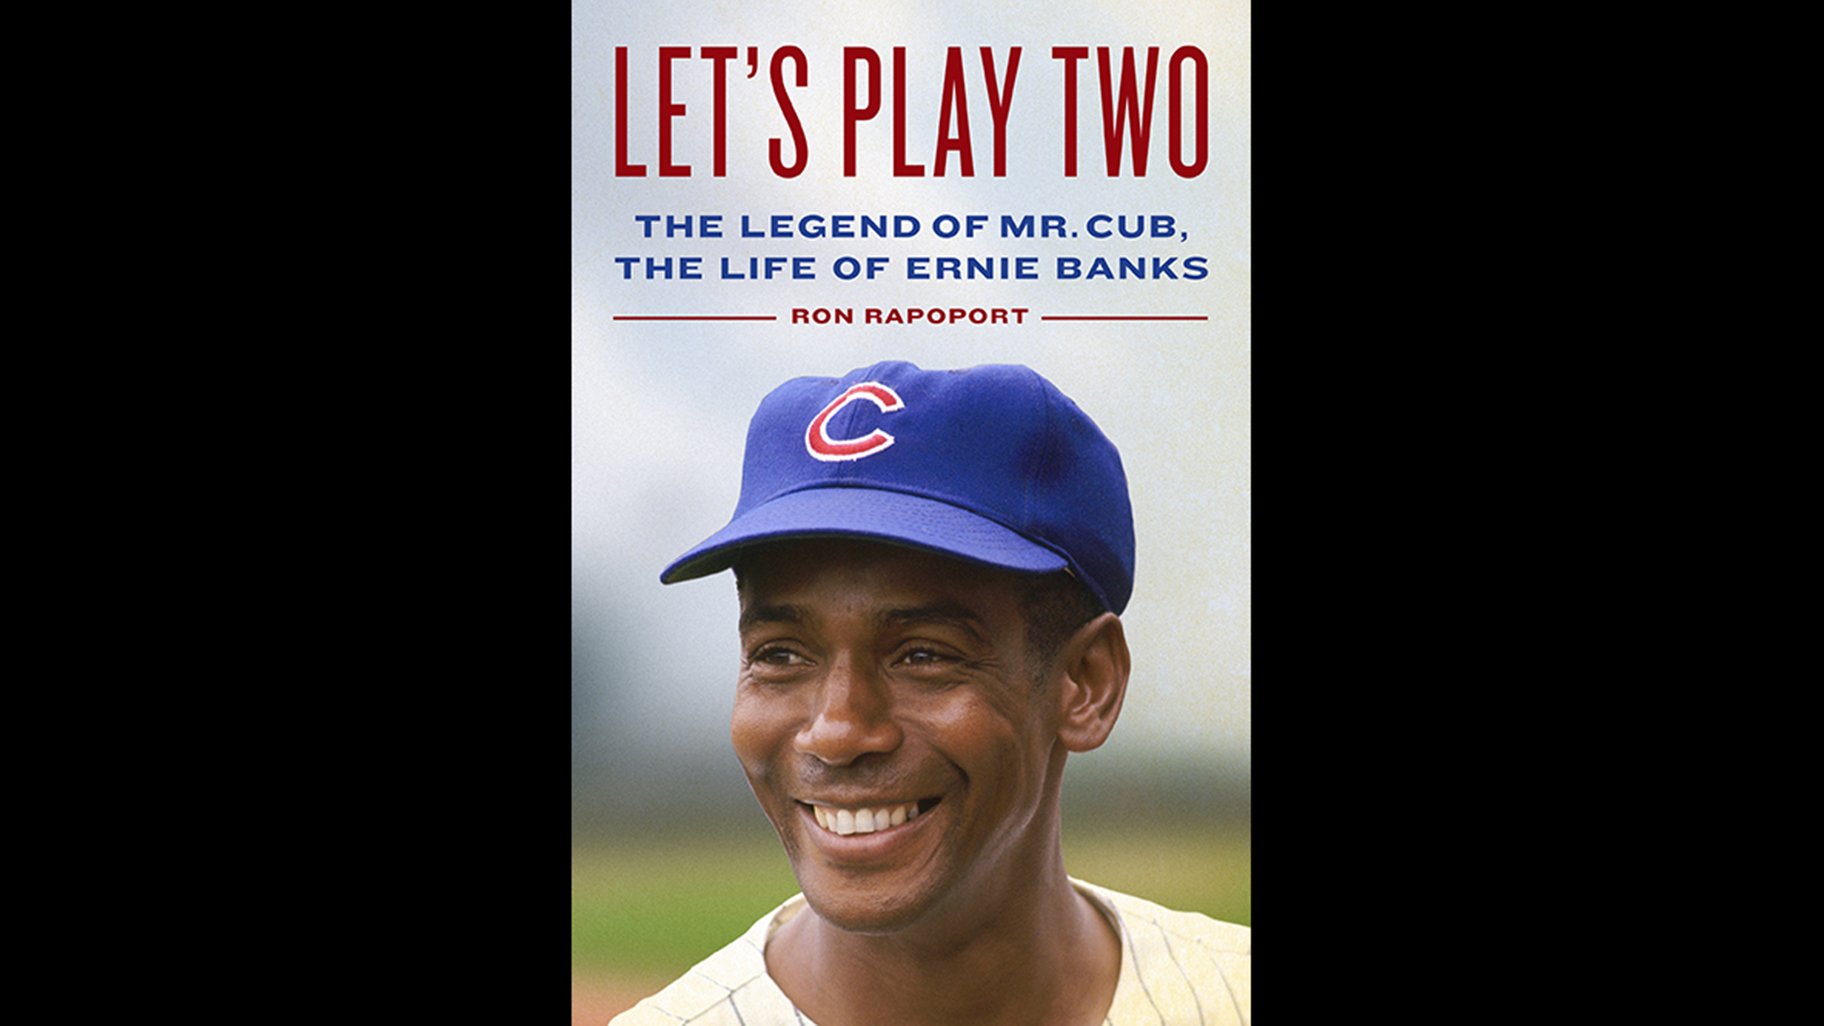 New Biography of Ernie Banks Goes Beyond Legend of Mr. Cub